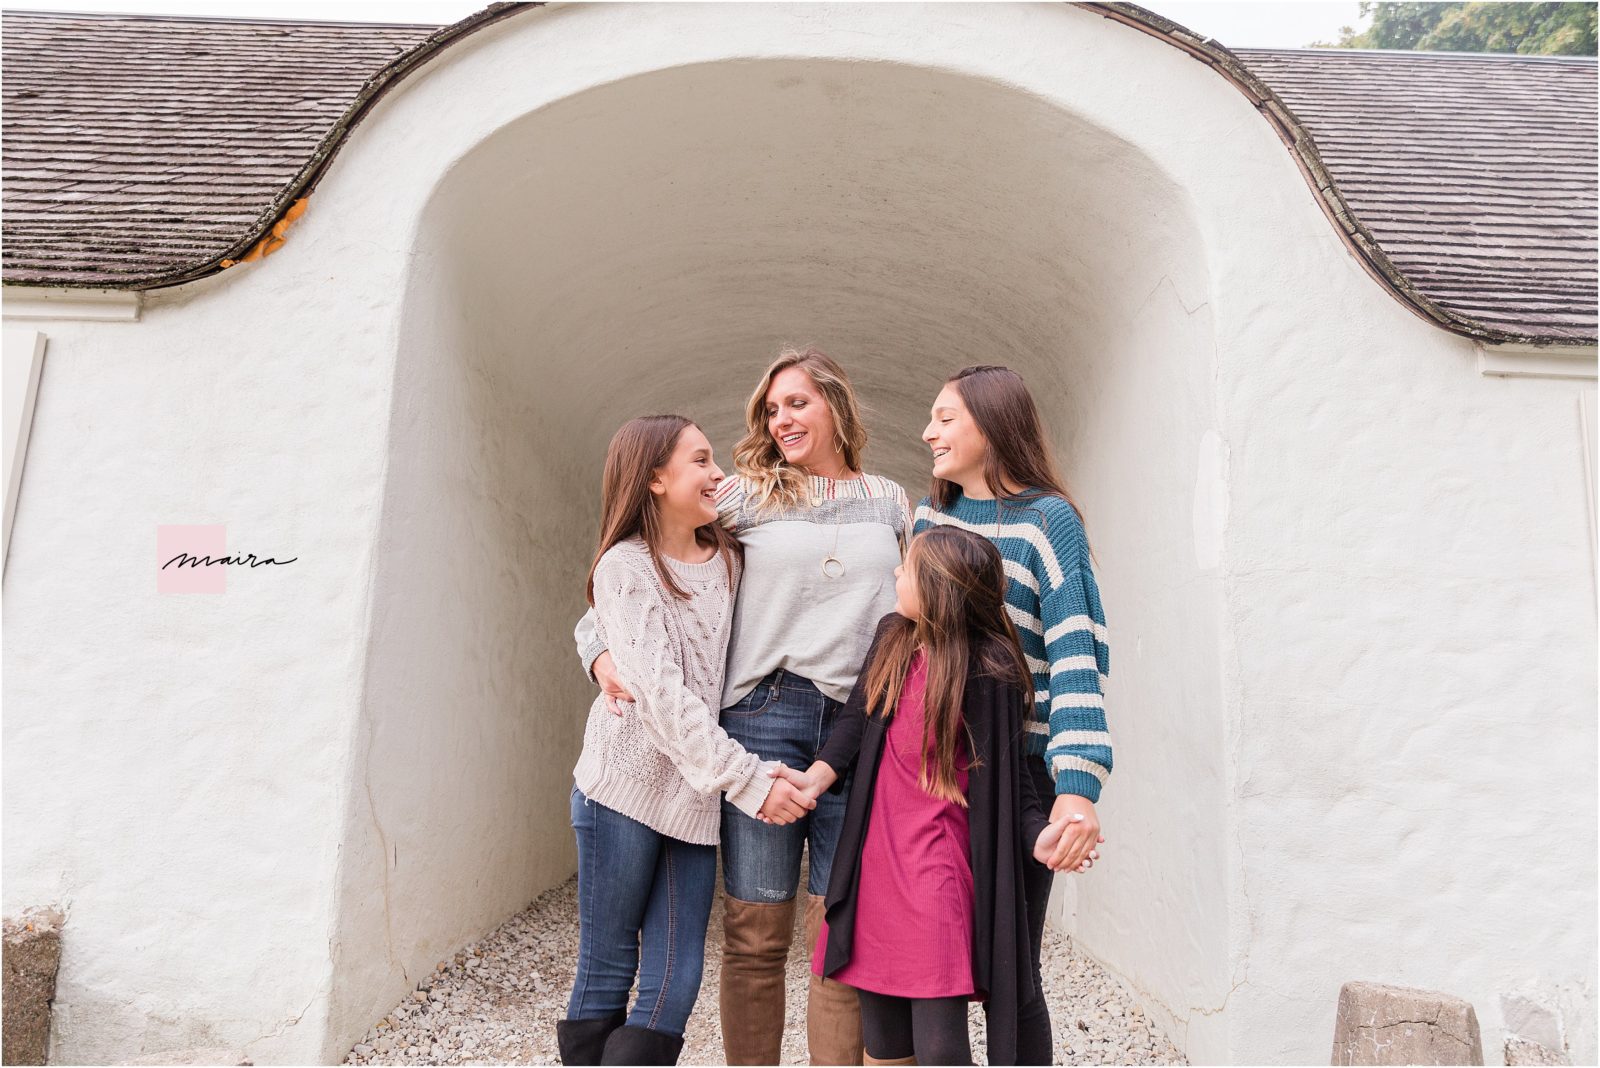 Beautiful Family Session in Adler Park, Libertyville, IL Mother and her four sweet daughters, Sisters